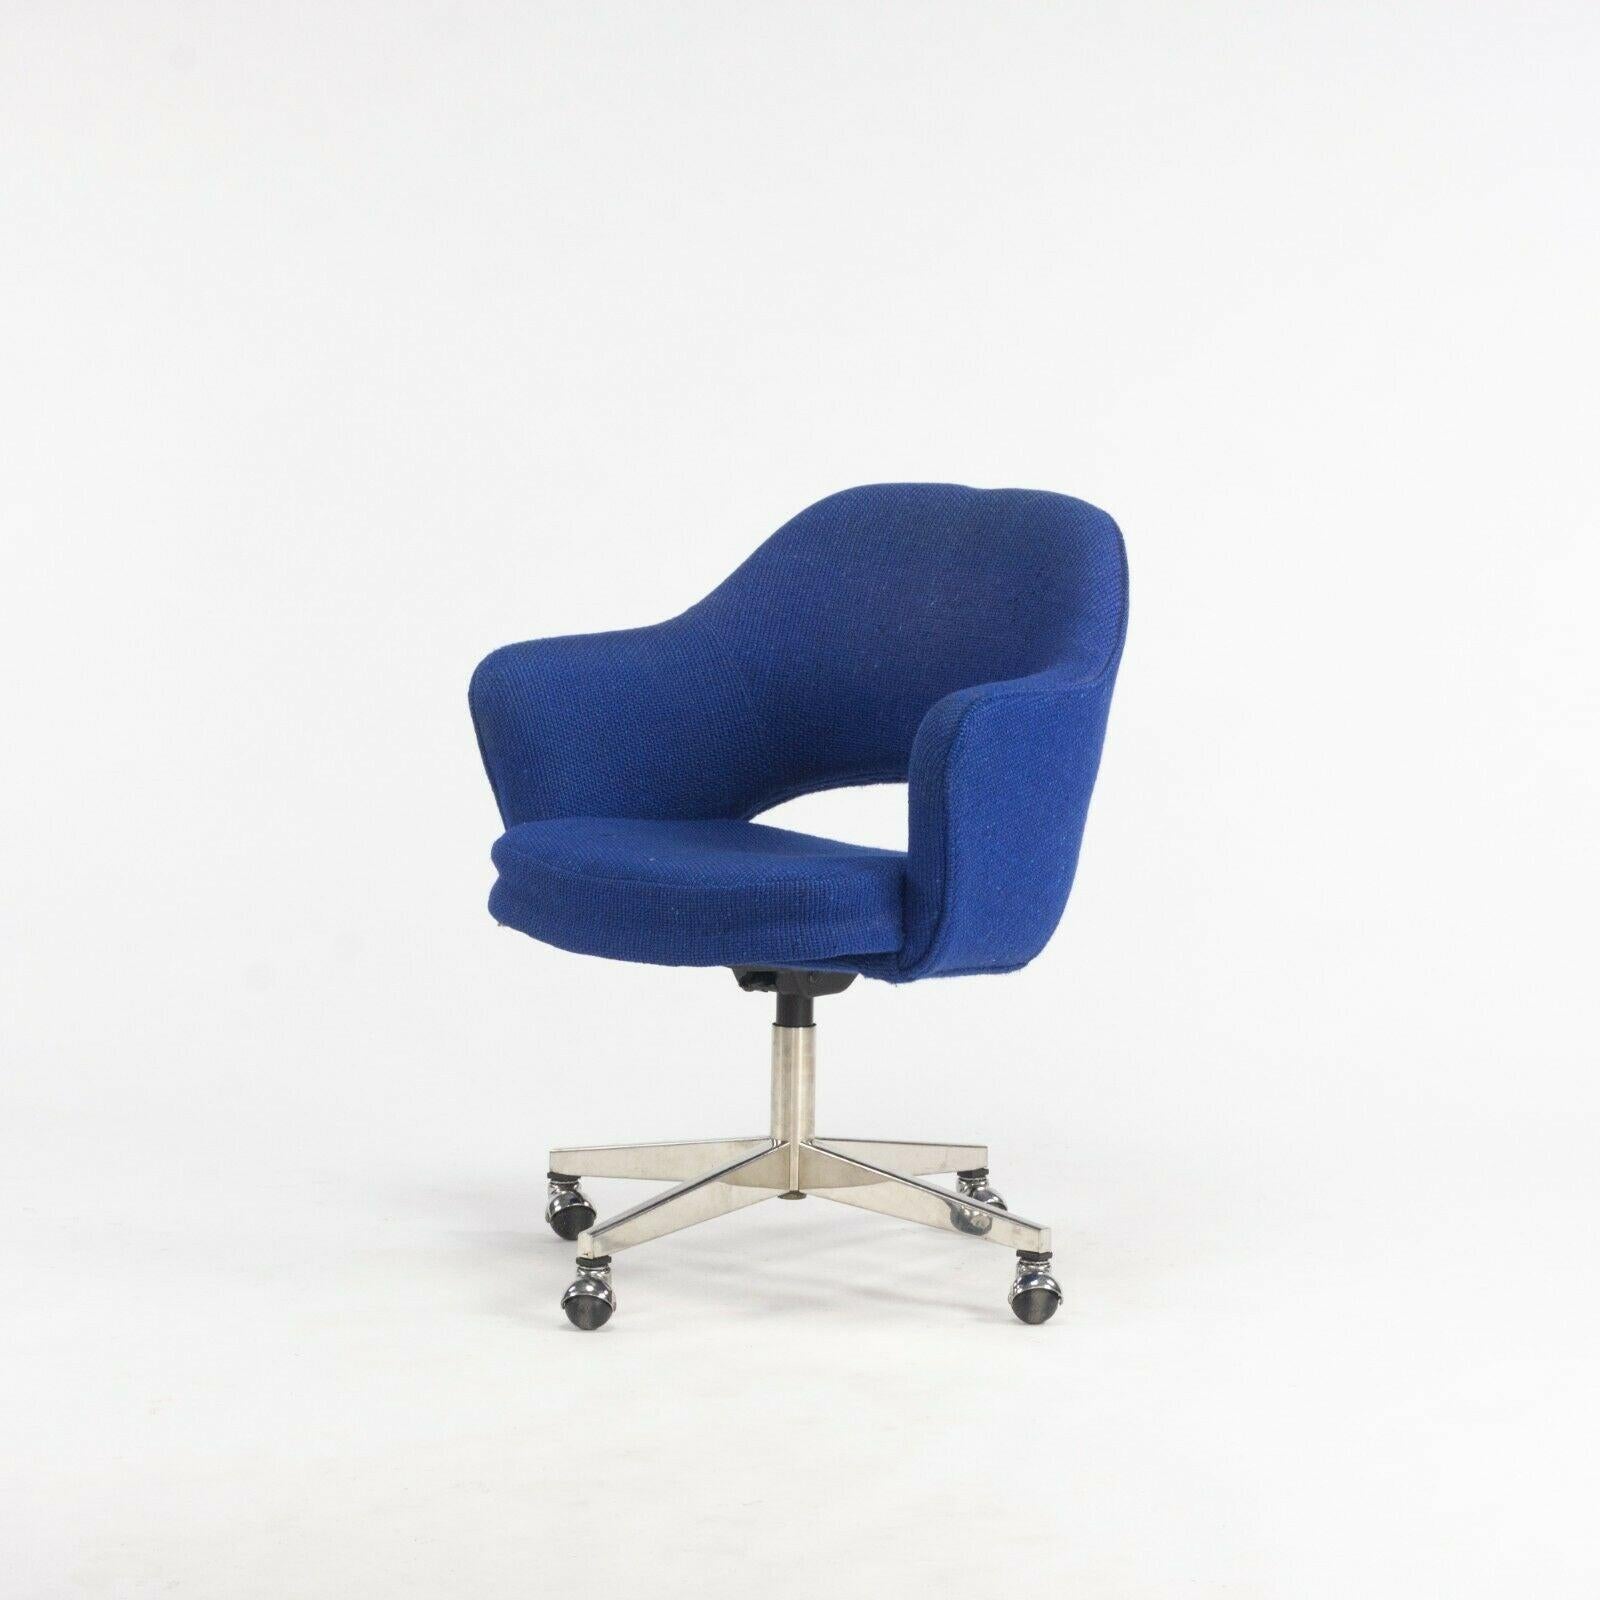 1974 Eero Saarinen for Knoll Rolling Executive Office Chair Original Blue Fabric For Sale 1